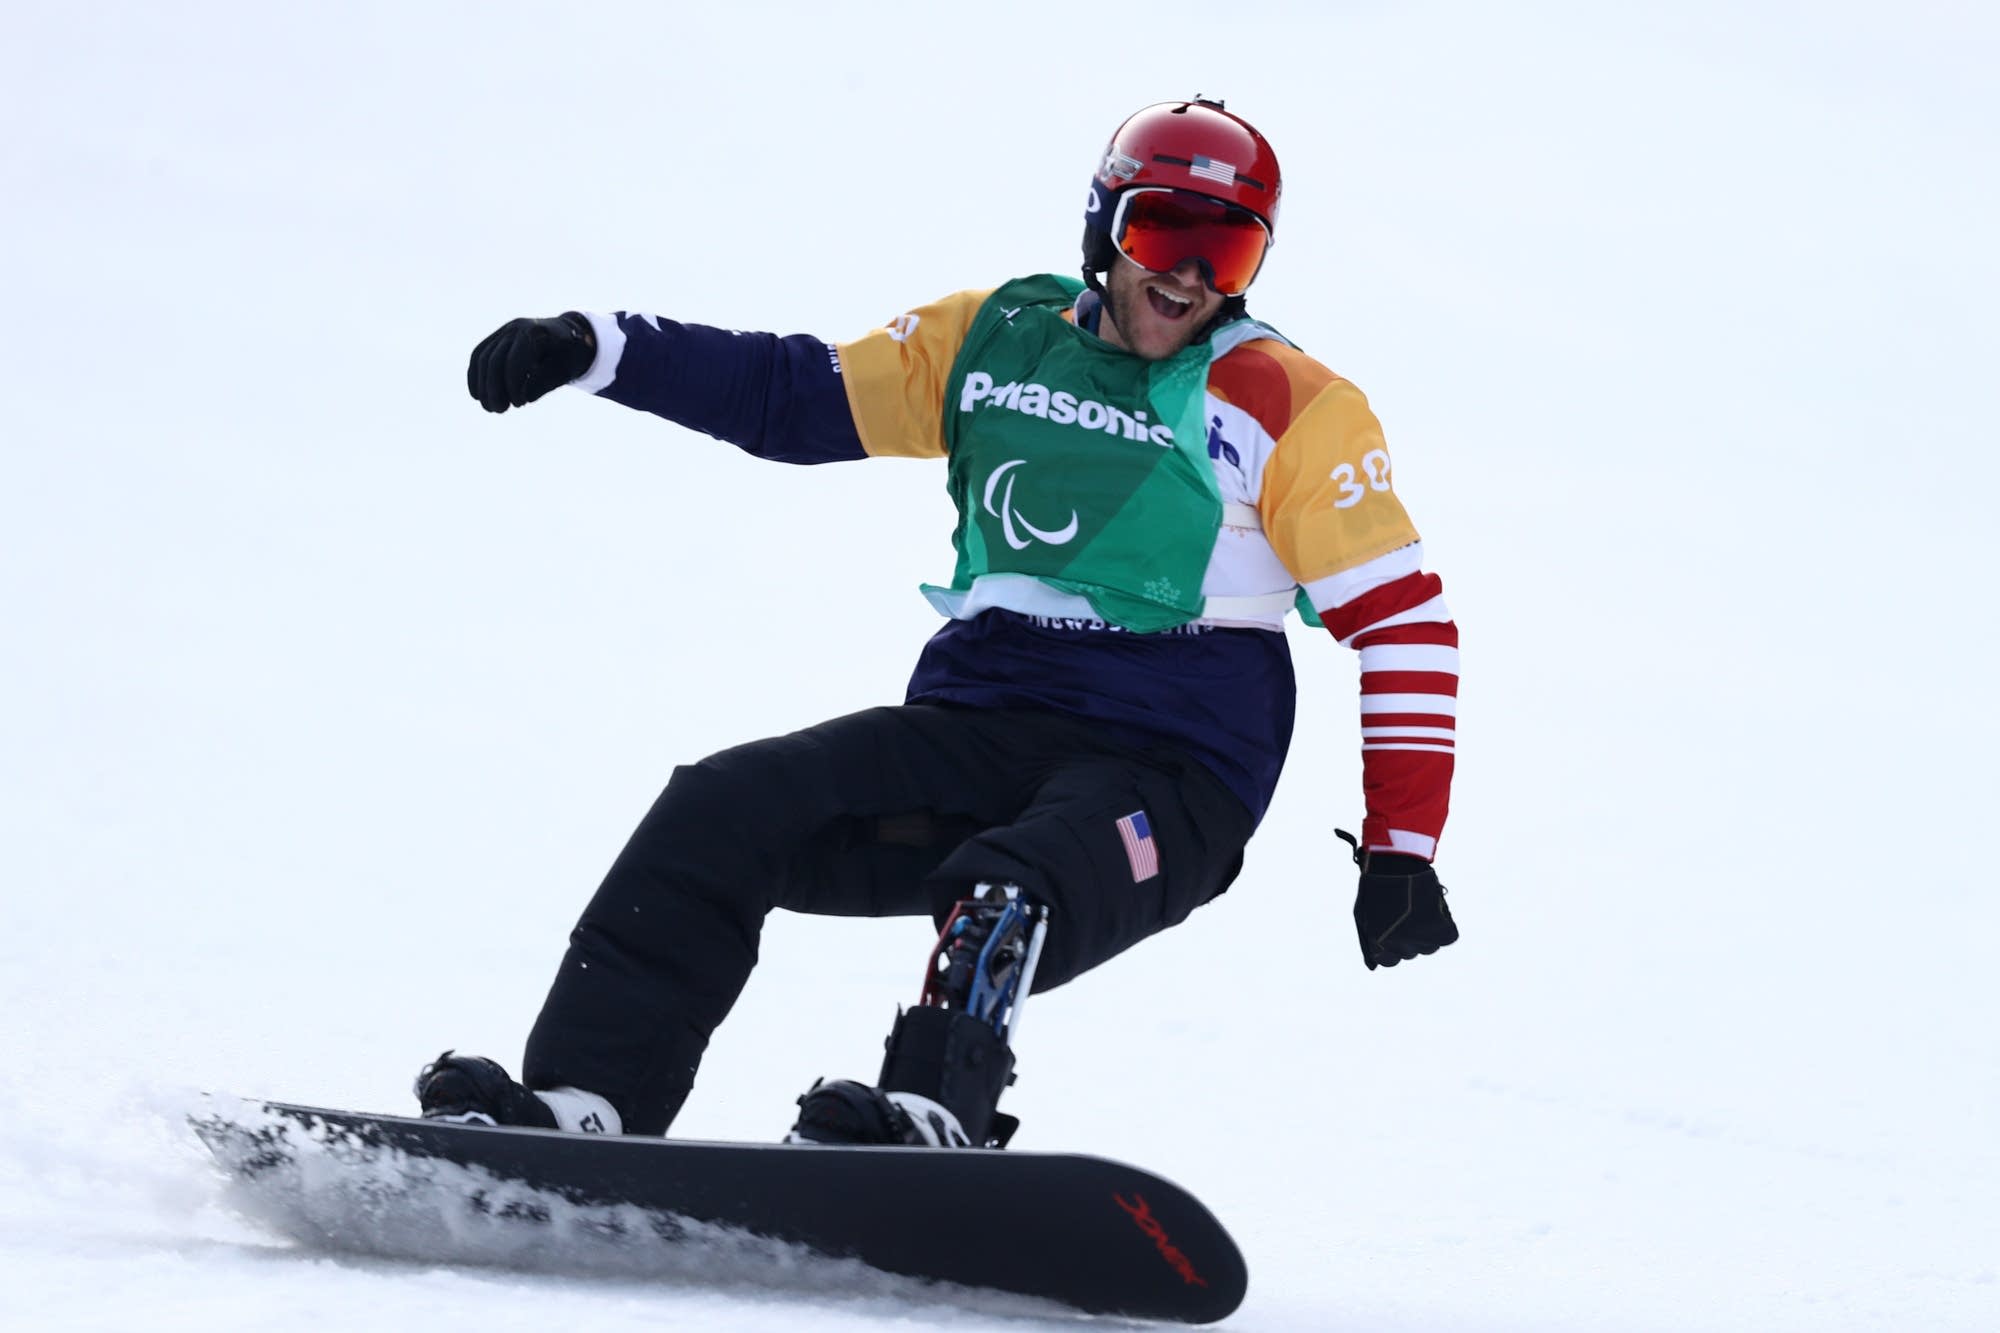 Minnesota snowboarder Mike Schultz wins gold at Paralympics ...